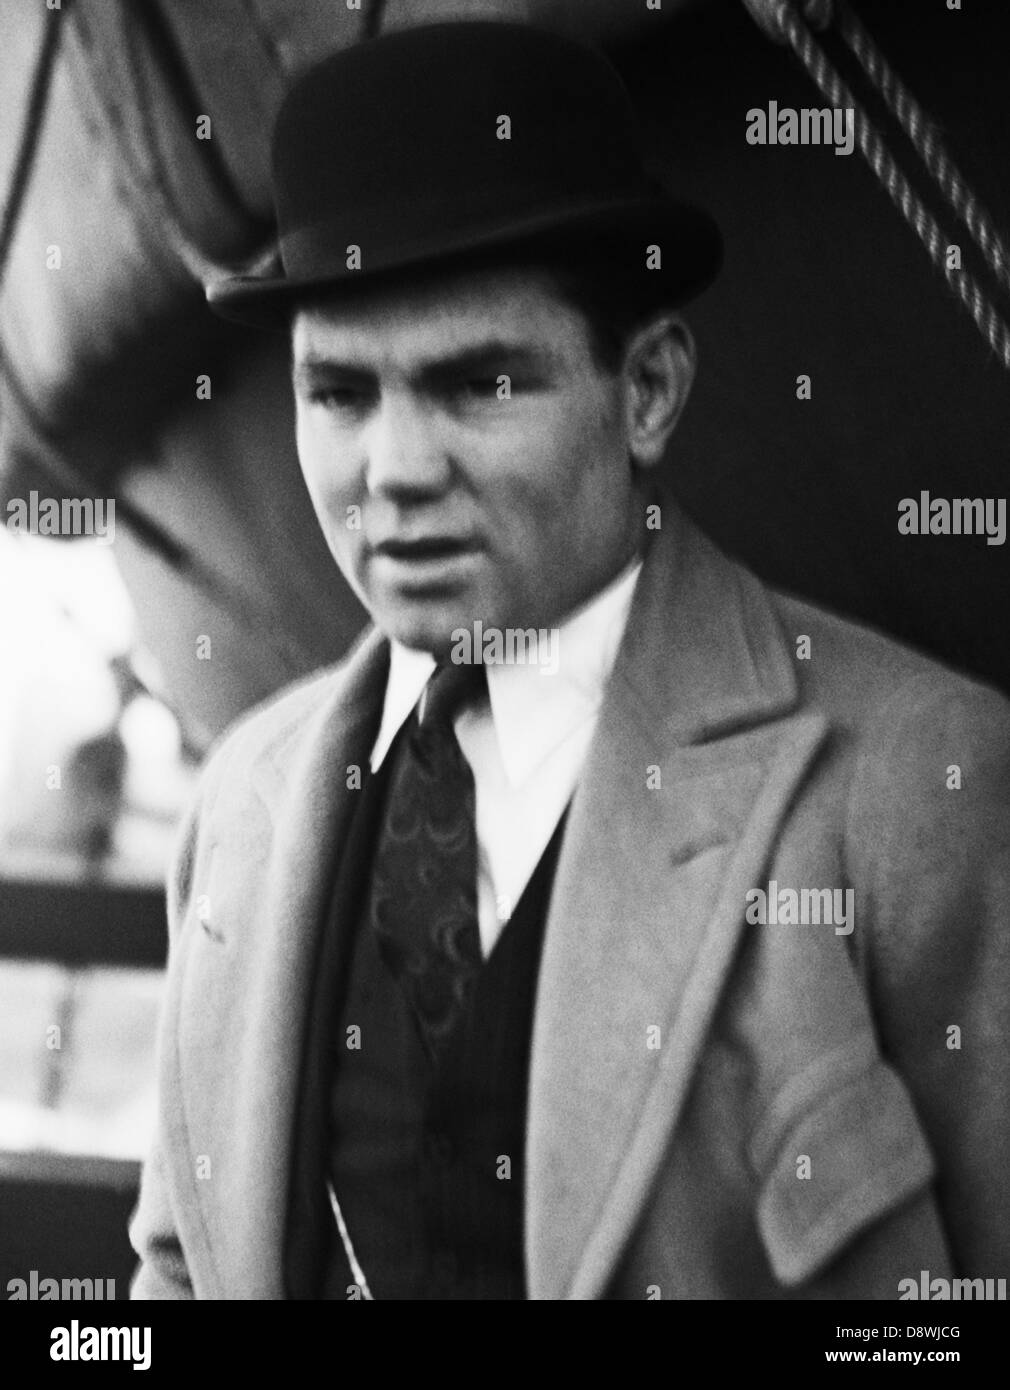 Vintage photo of boxer Jack Dempsey (1895 – 1983) – Dempsey, known as “The Manassa Mauler”, was World Heavyweight Champion from 1919 to 1926. Photo circa 1920 – 1925. Stock Photo